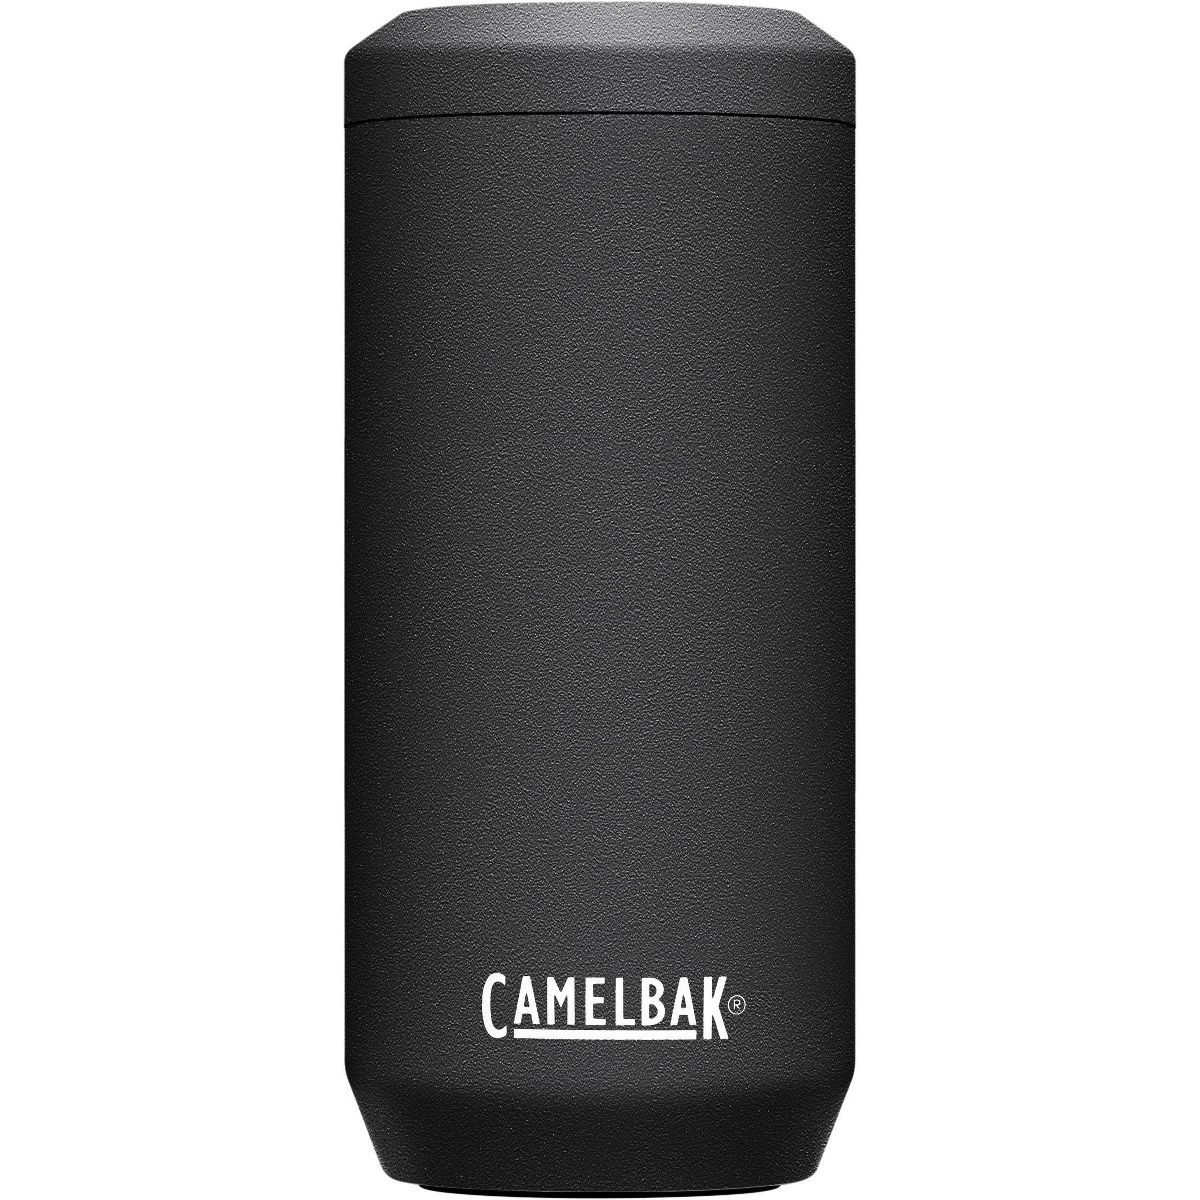 CamelBak 12oz Vacuum Insulated Stainless Steel Slim Can Cooler | Target